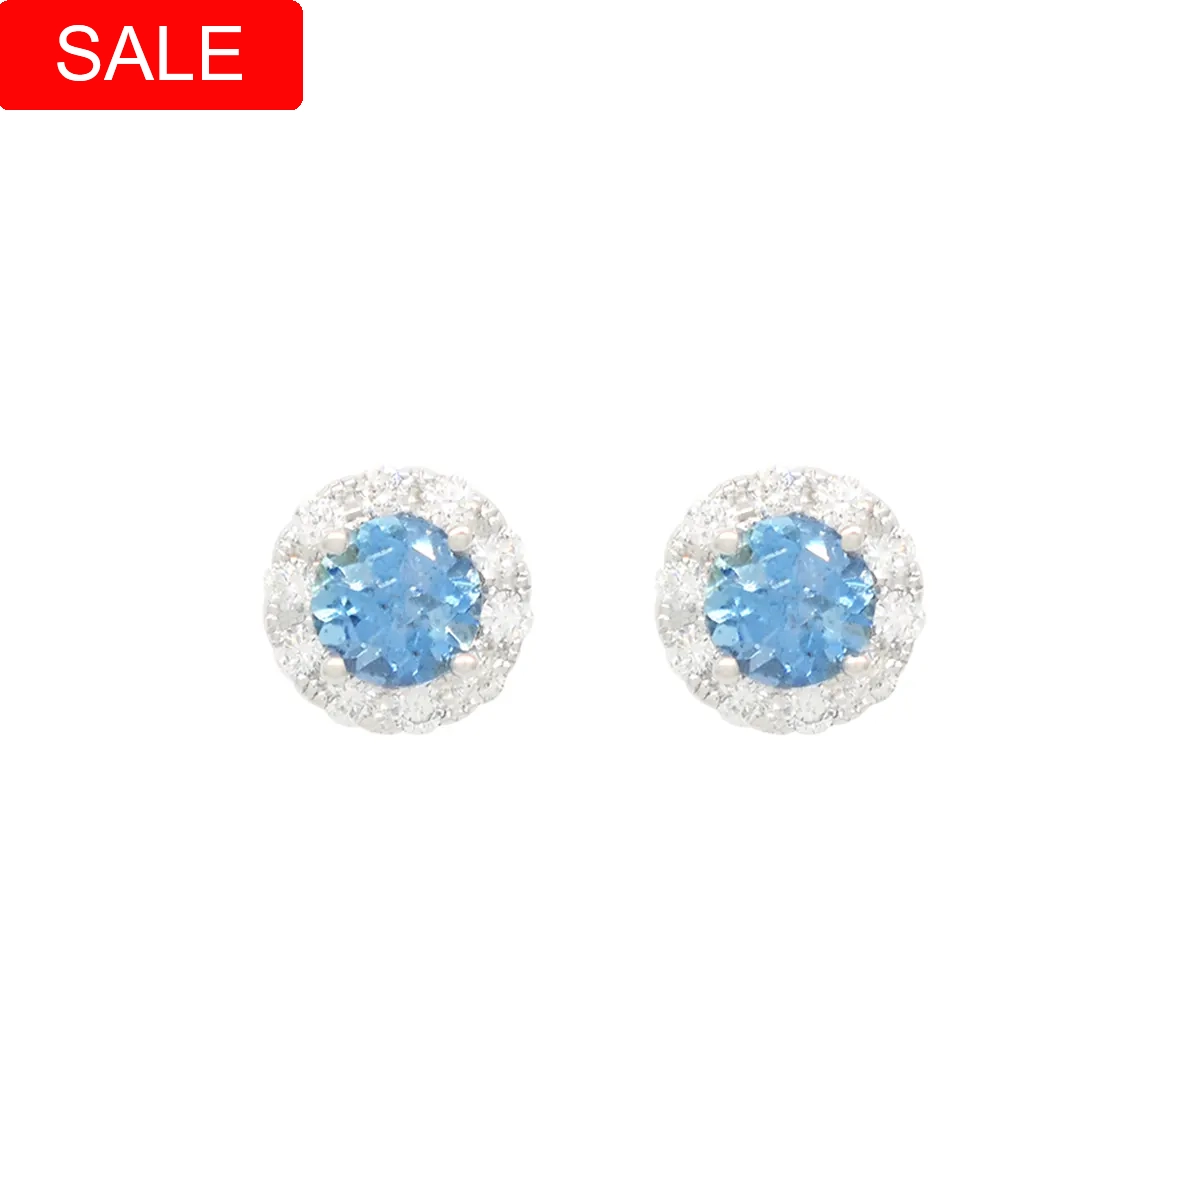 Dainty Stud Earrings With Aquamarine and Diamond Halo in 18K White Gold